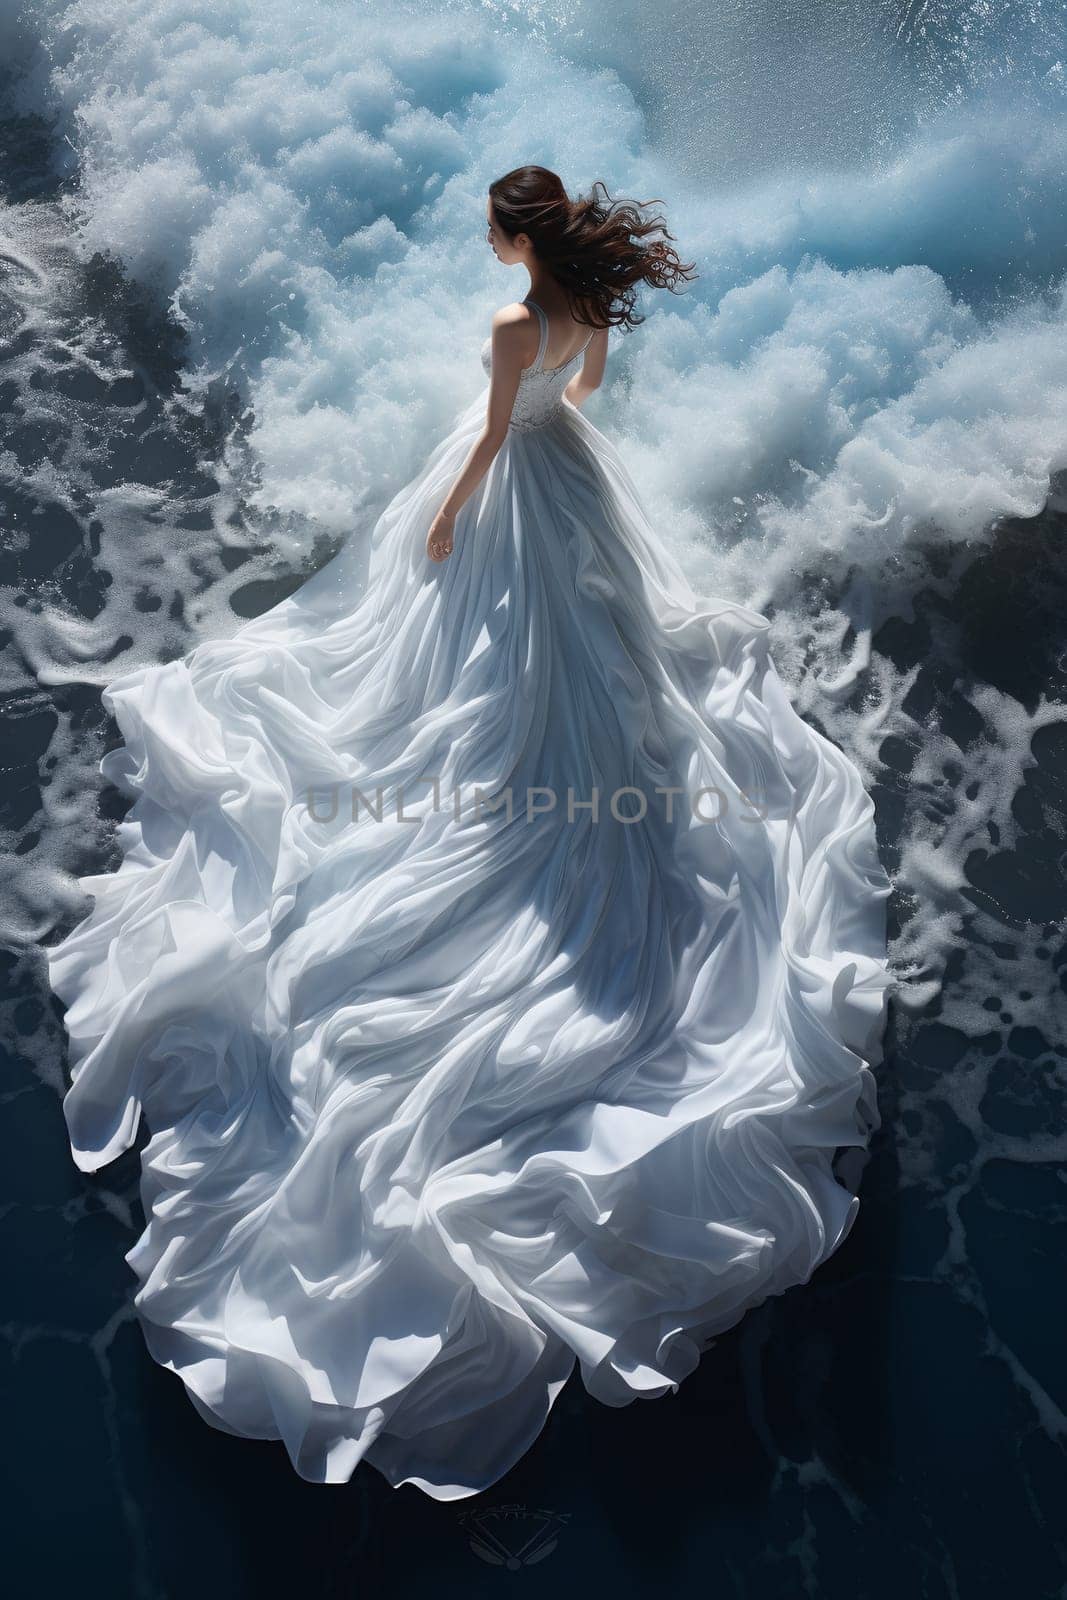 Ethereal Woman in Billowing White Gown Amidst Clouds by chrisroll